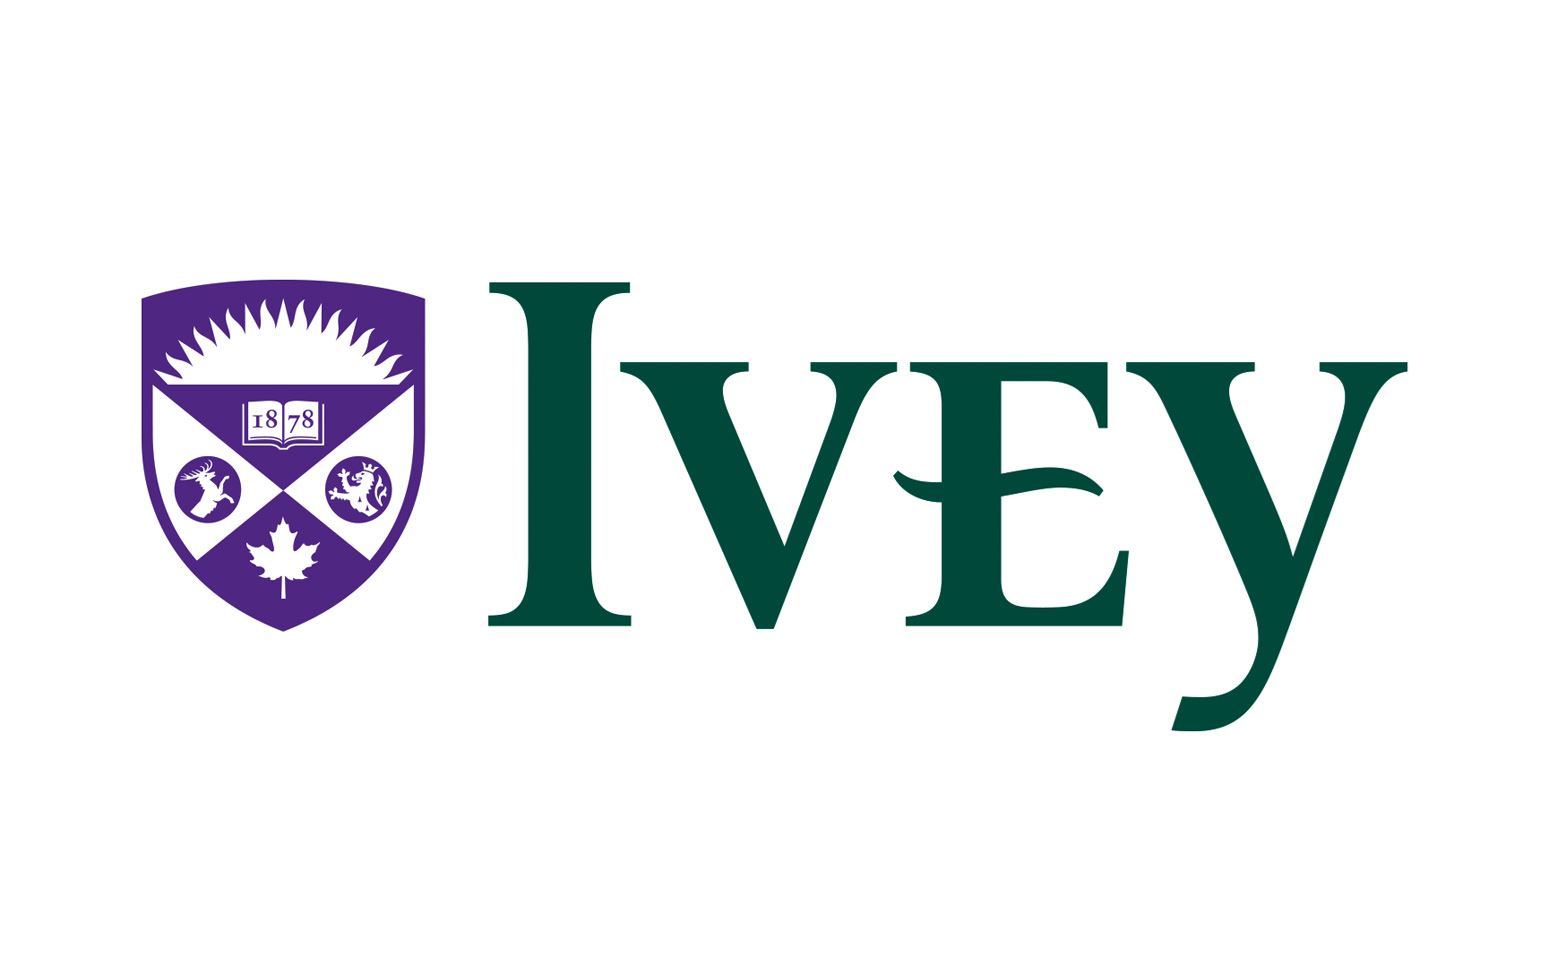 Feature Profile: Kevin Davis, Ivey MBA 2015